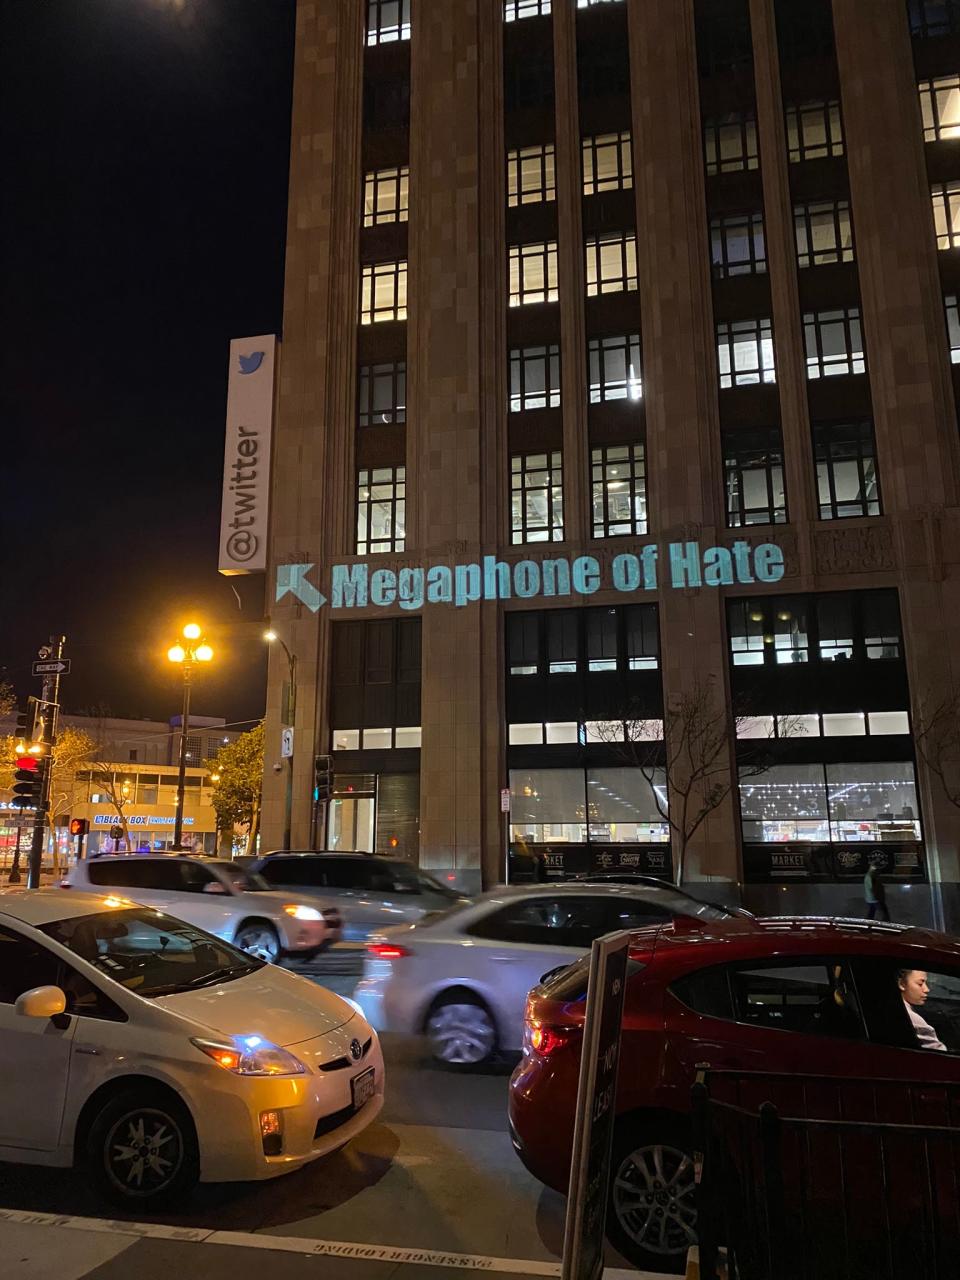 One of Alan Marling's projections on Twitter headquarters in San Francisco, California.